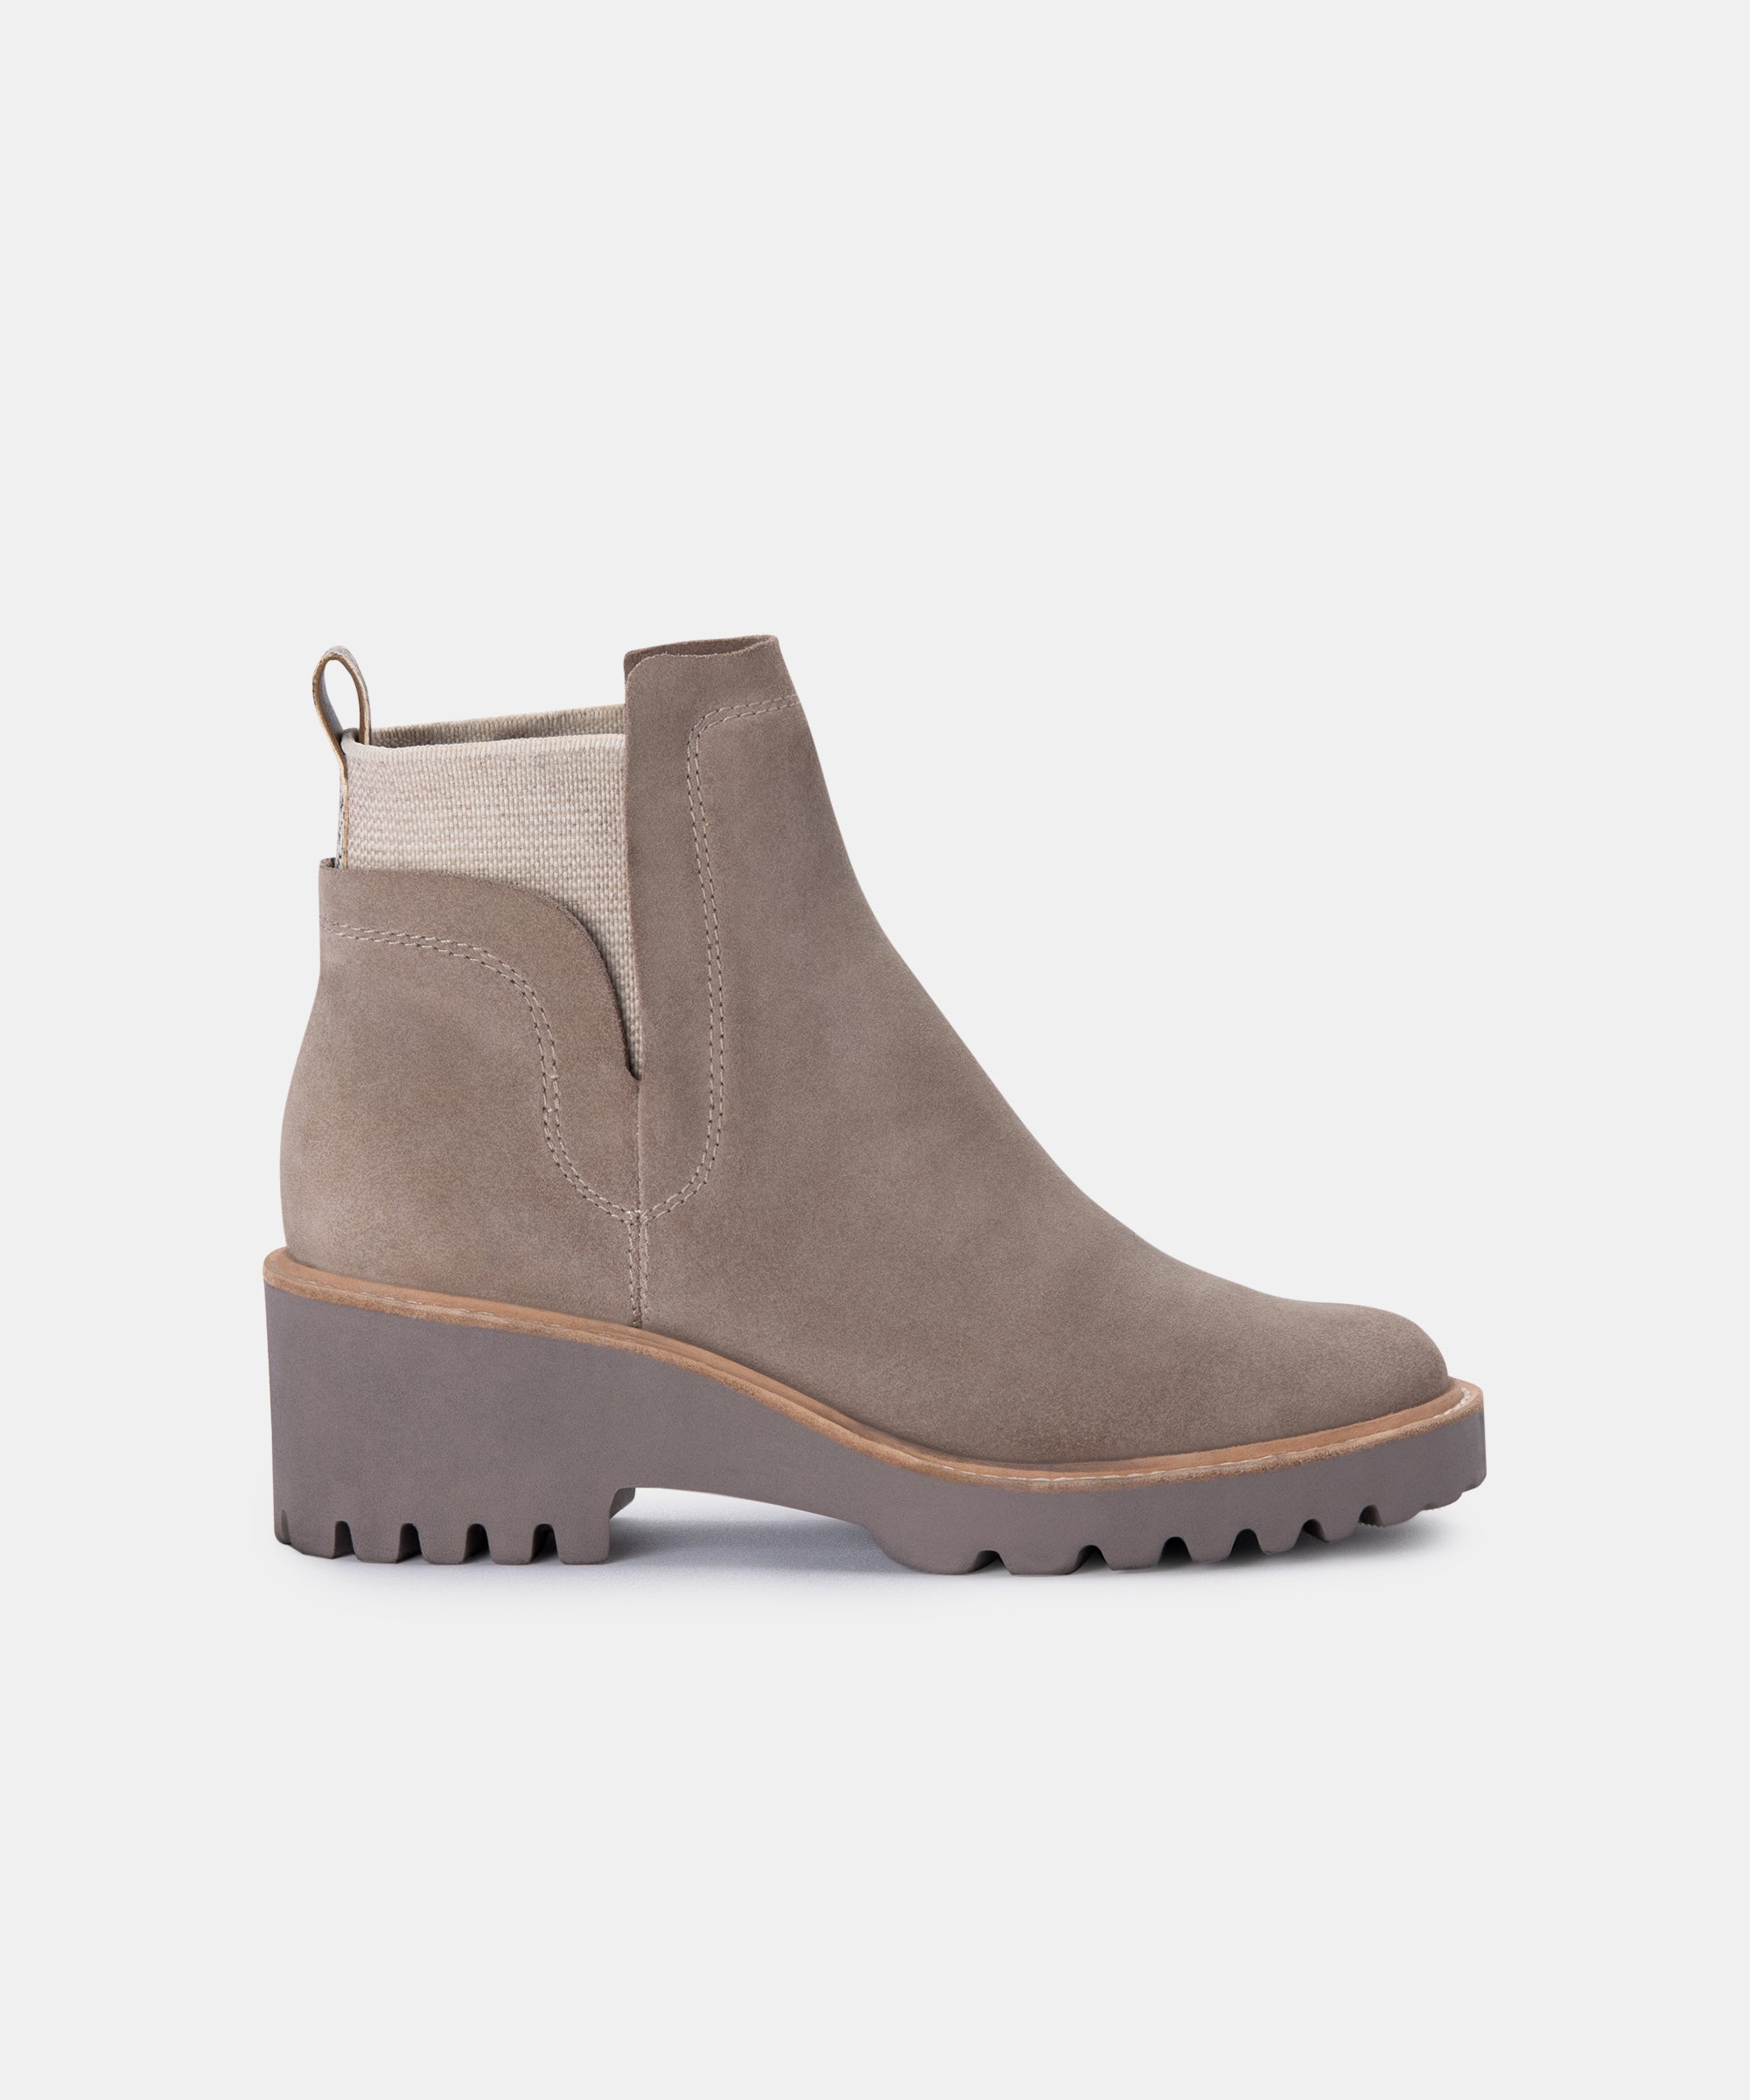 dolce vita drew ankle boots